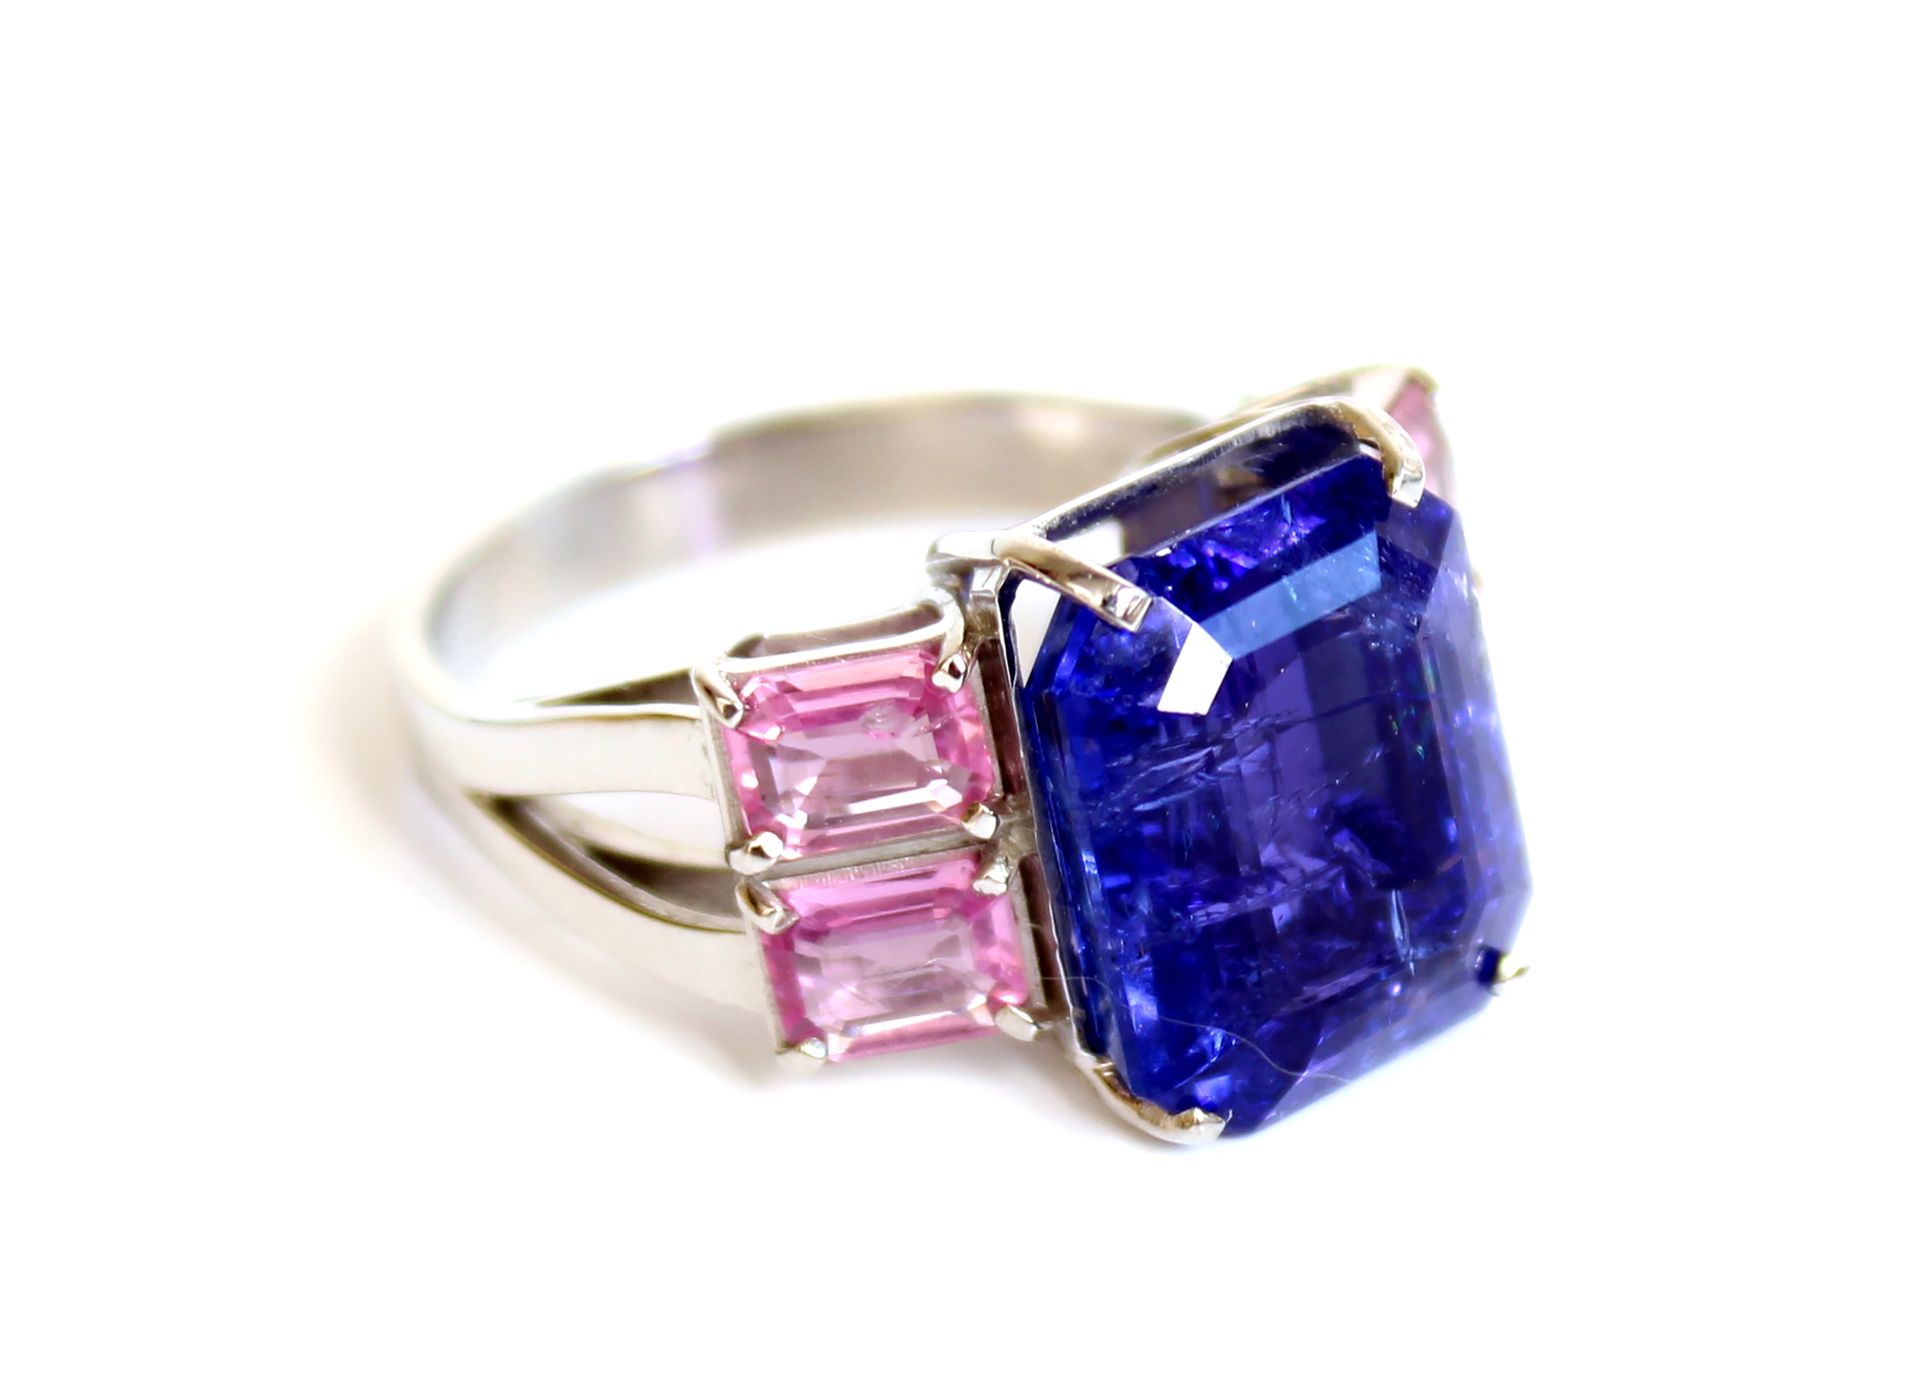 Null Ring in 18K (750 thousandths) white gold, set with an emerald-cut tanzanite&hellip;